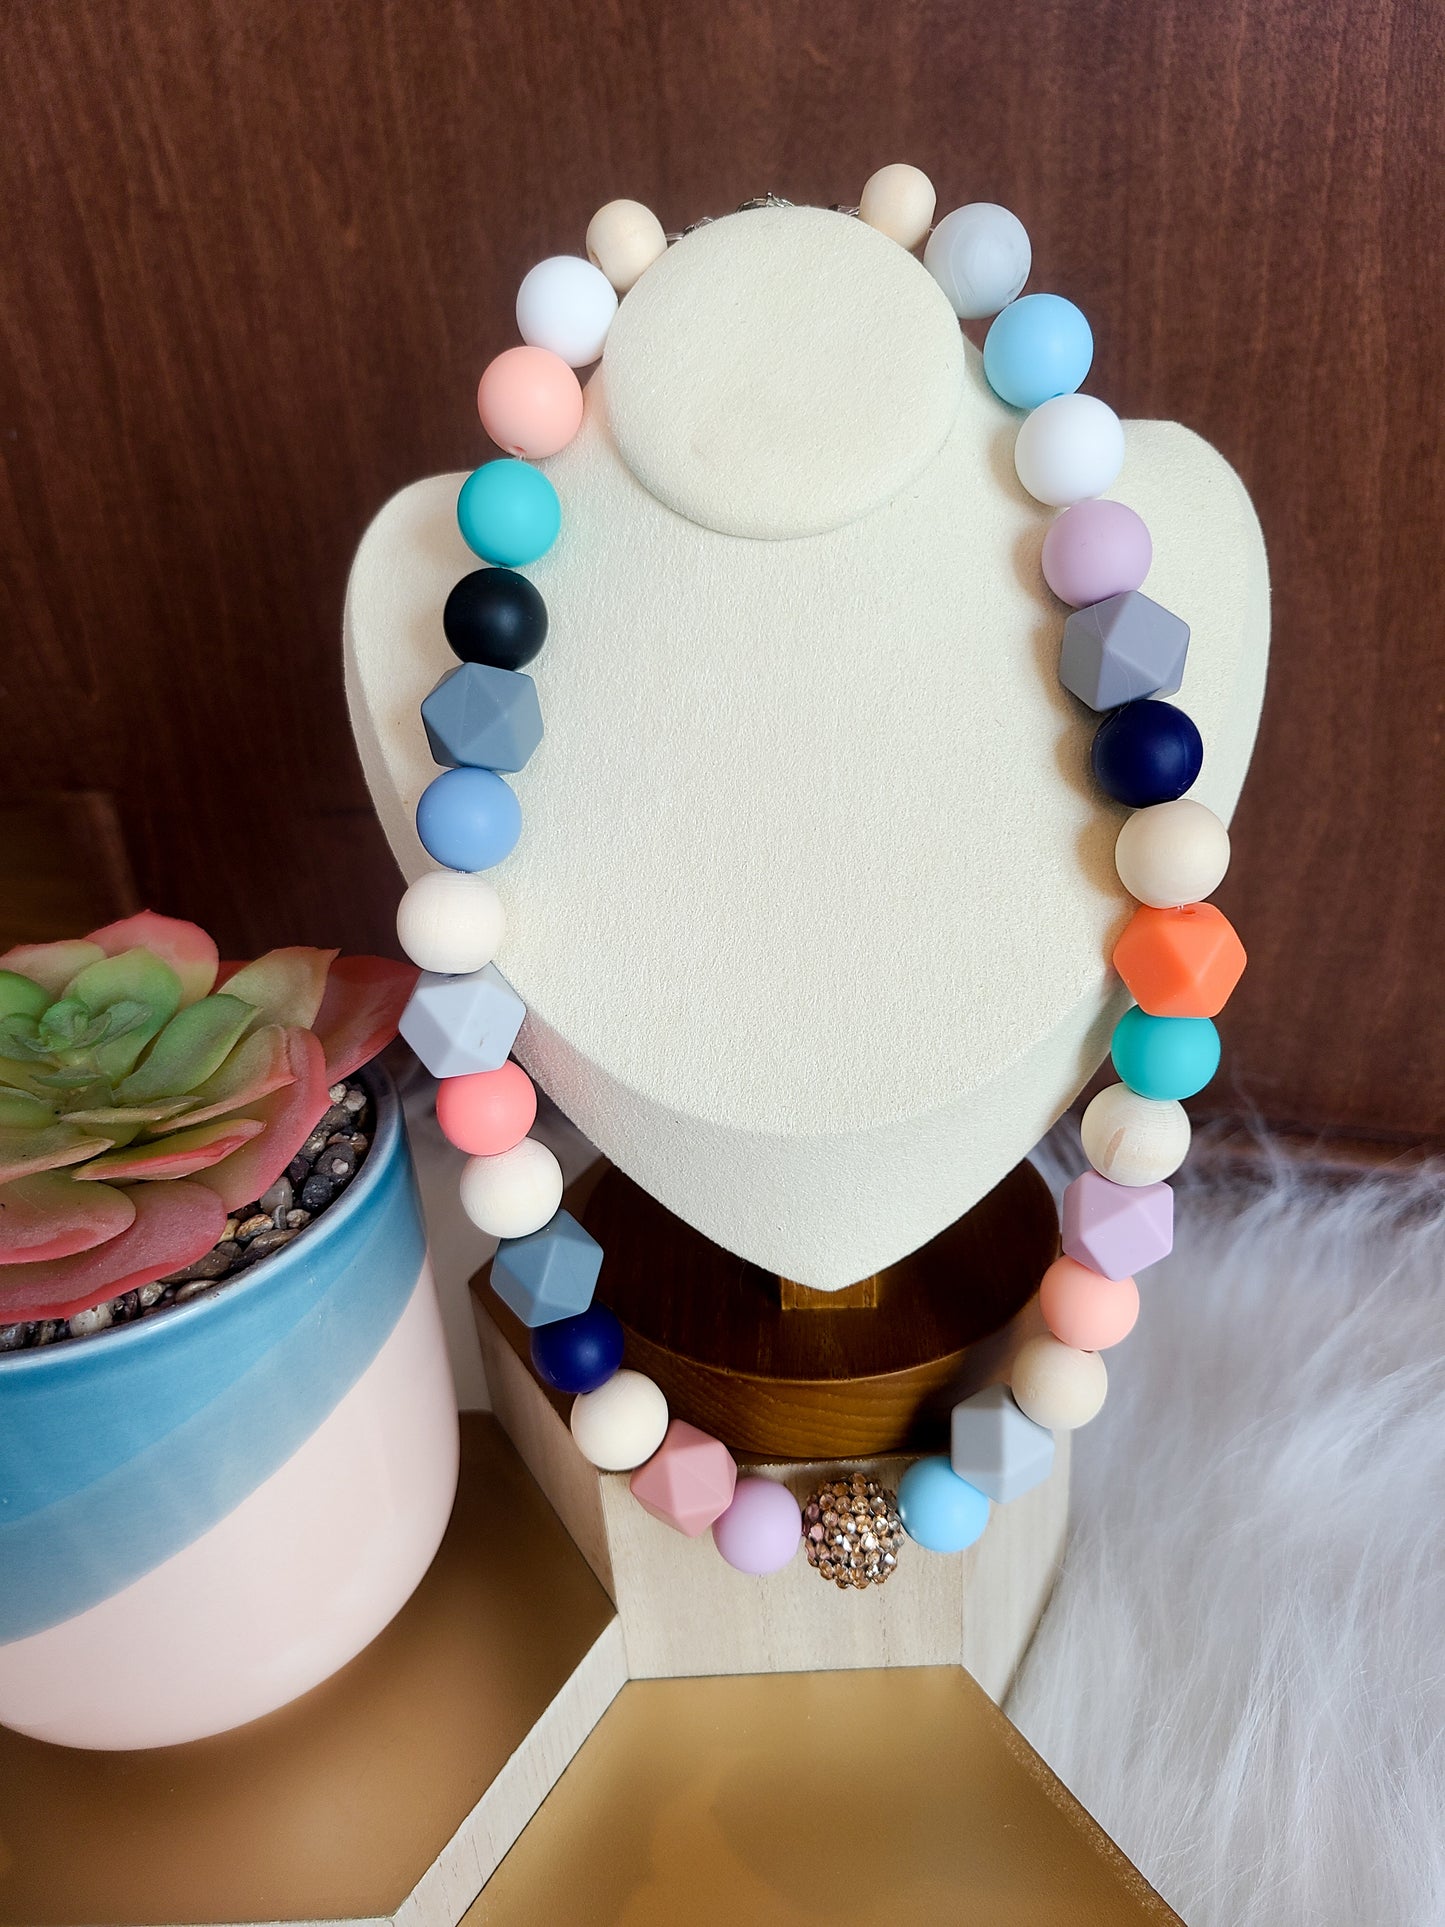 Sparkling Silicone Bead Bracelet and Necklace Set